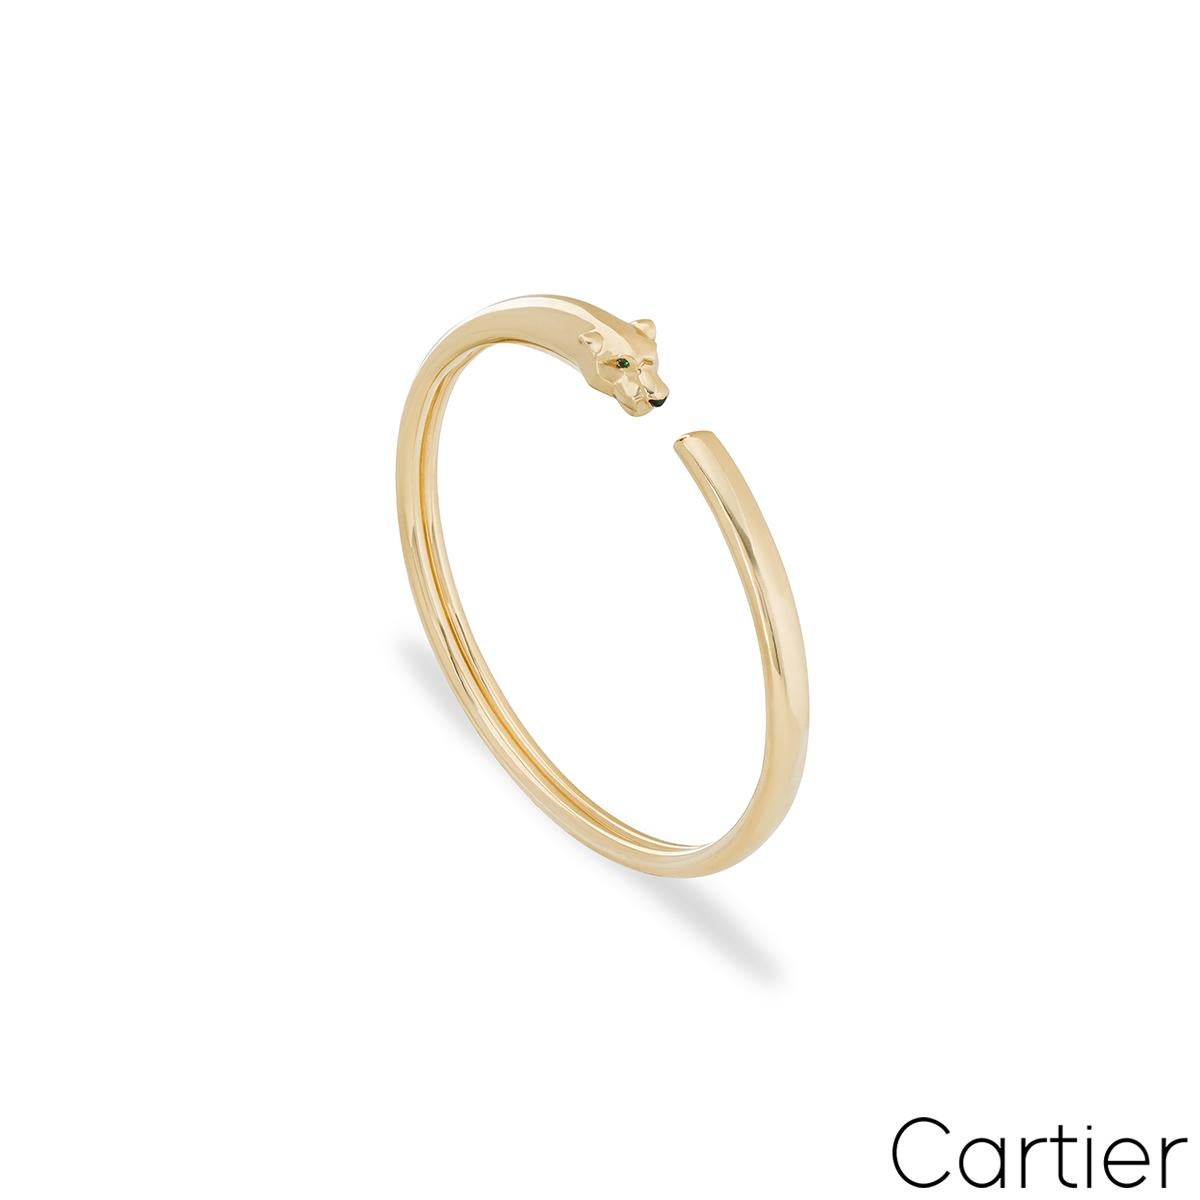 A striking 18k yellow gold bracelet by Cartier from the Panthere de Cartier collection. The bracelet comprises of a panther head motif set with 2 round tsavorites as eyes and an onyx nose. This bracelet is in unworn condition, it's a size 16 and has